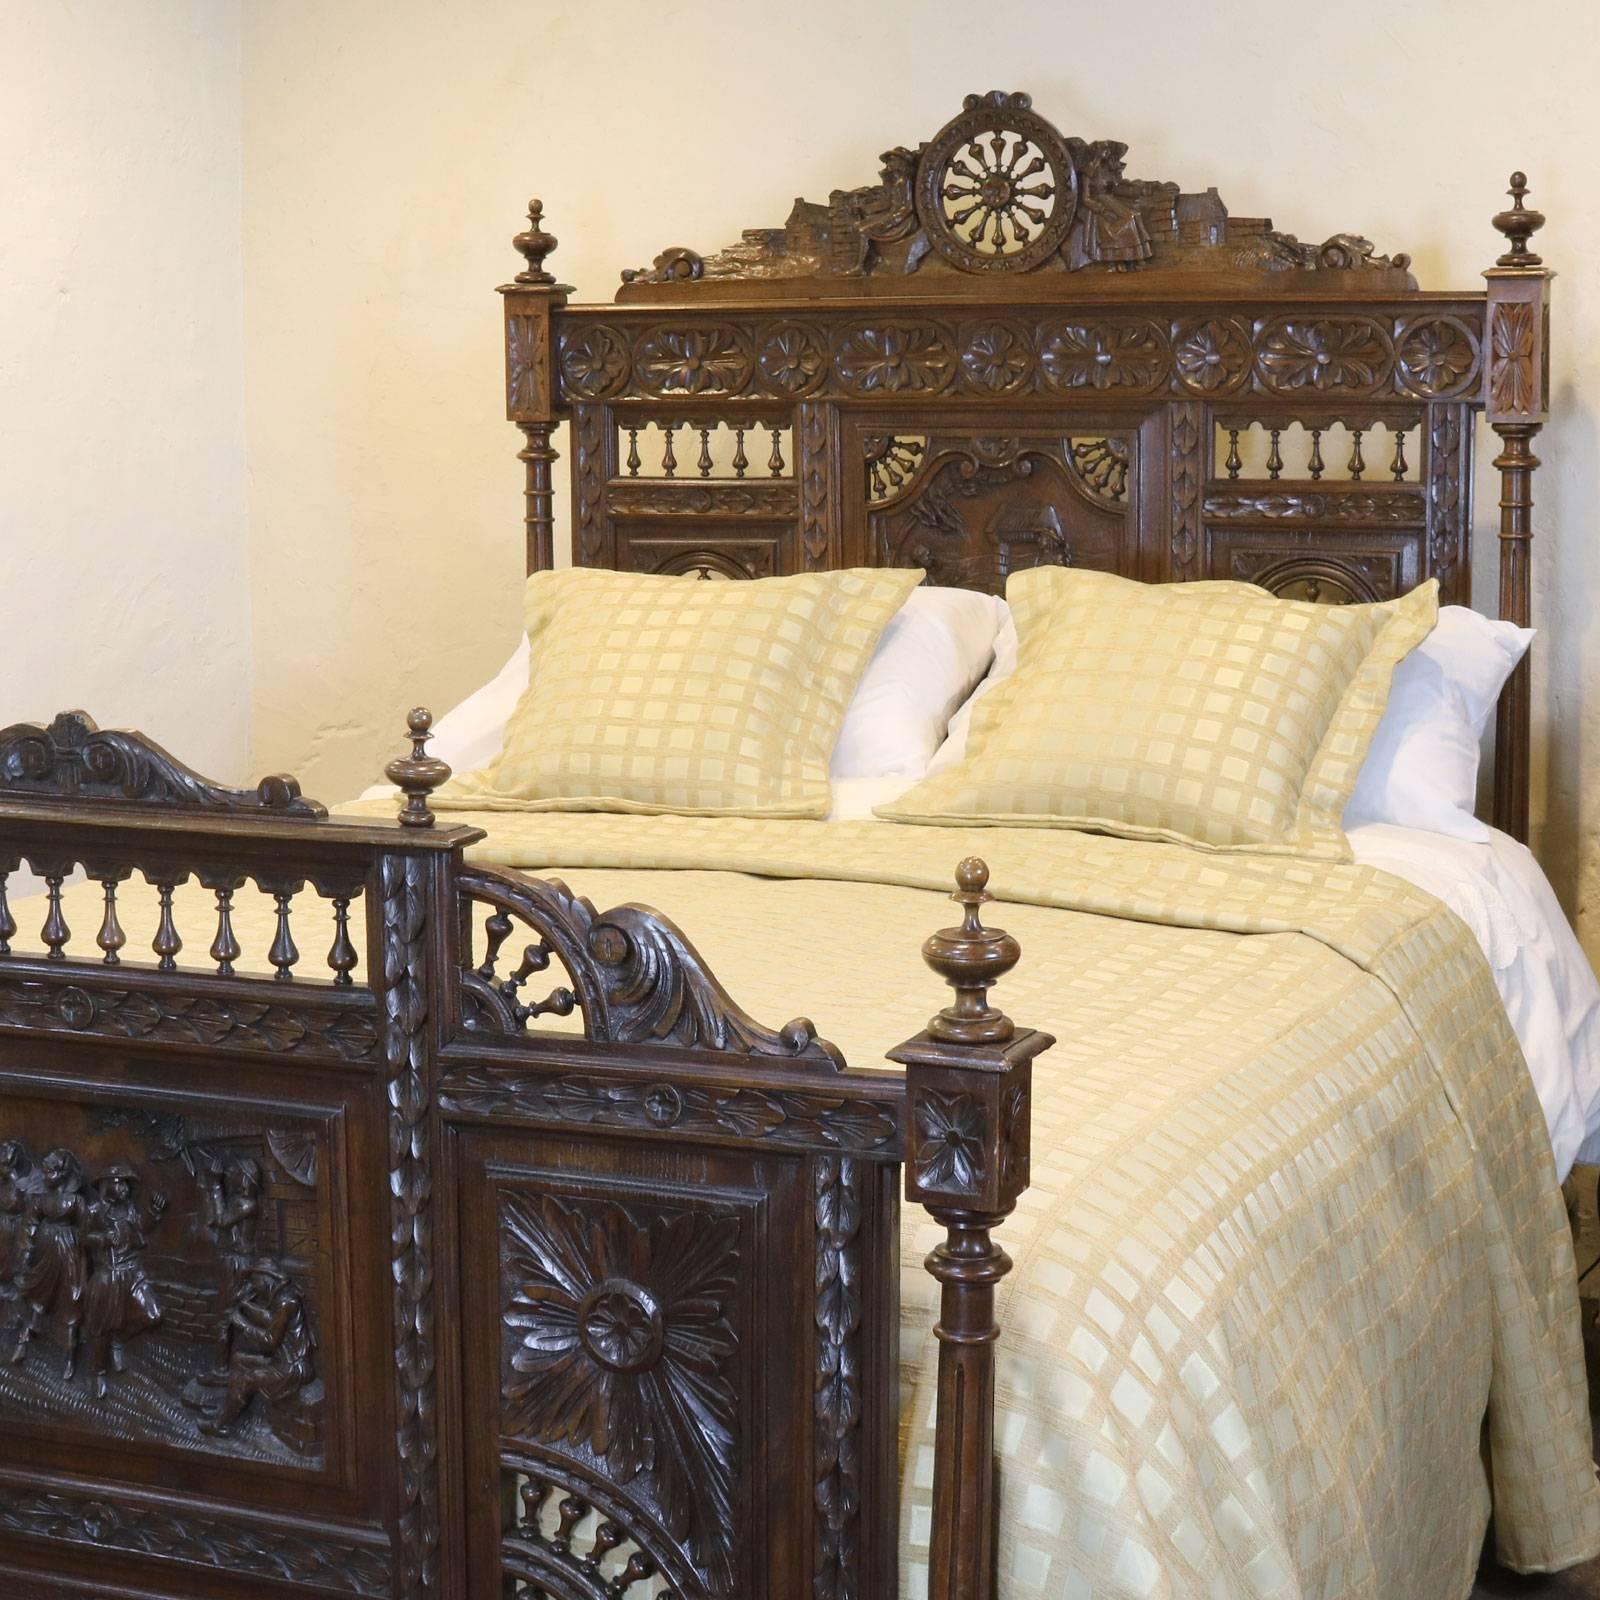 A superb Breton oak bed with decoratively carved panels depicting rural scenes of revelry and 'ship's wheel' spindles relating to the sea, circa 1900.

This bed accepts a 60in wide (British King or American Queen) bed base and mattress set.

The